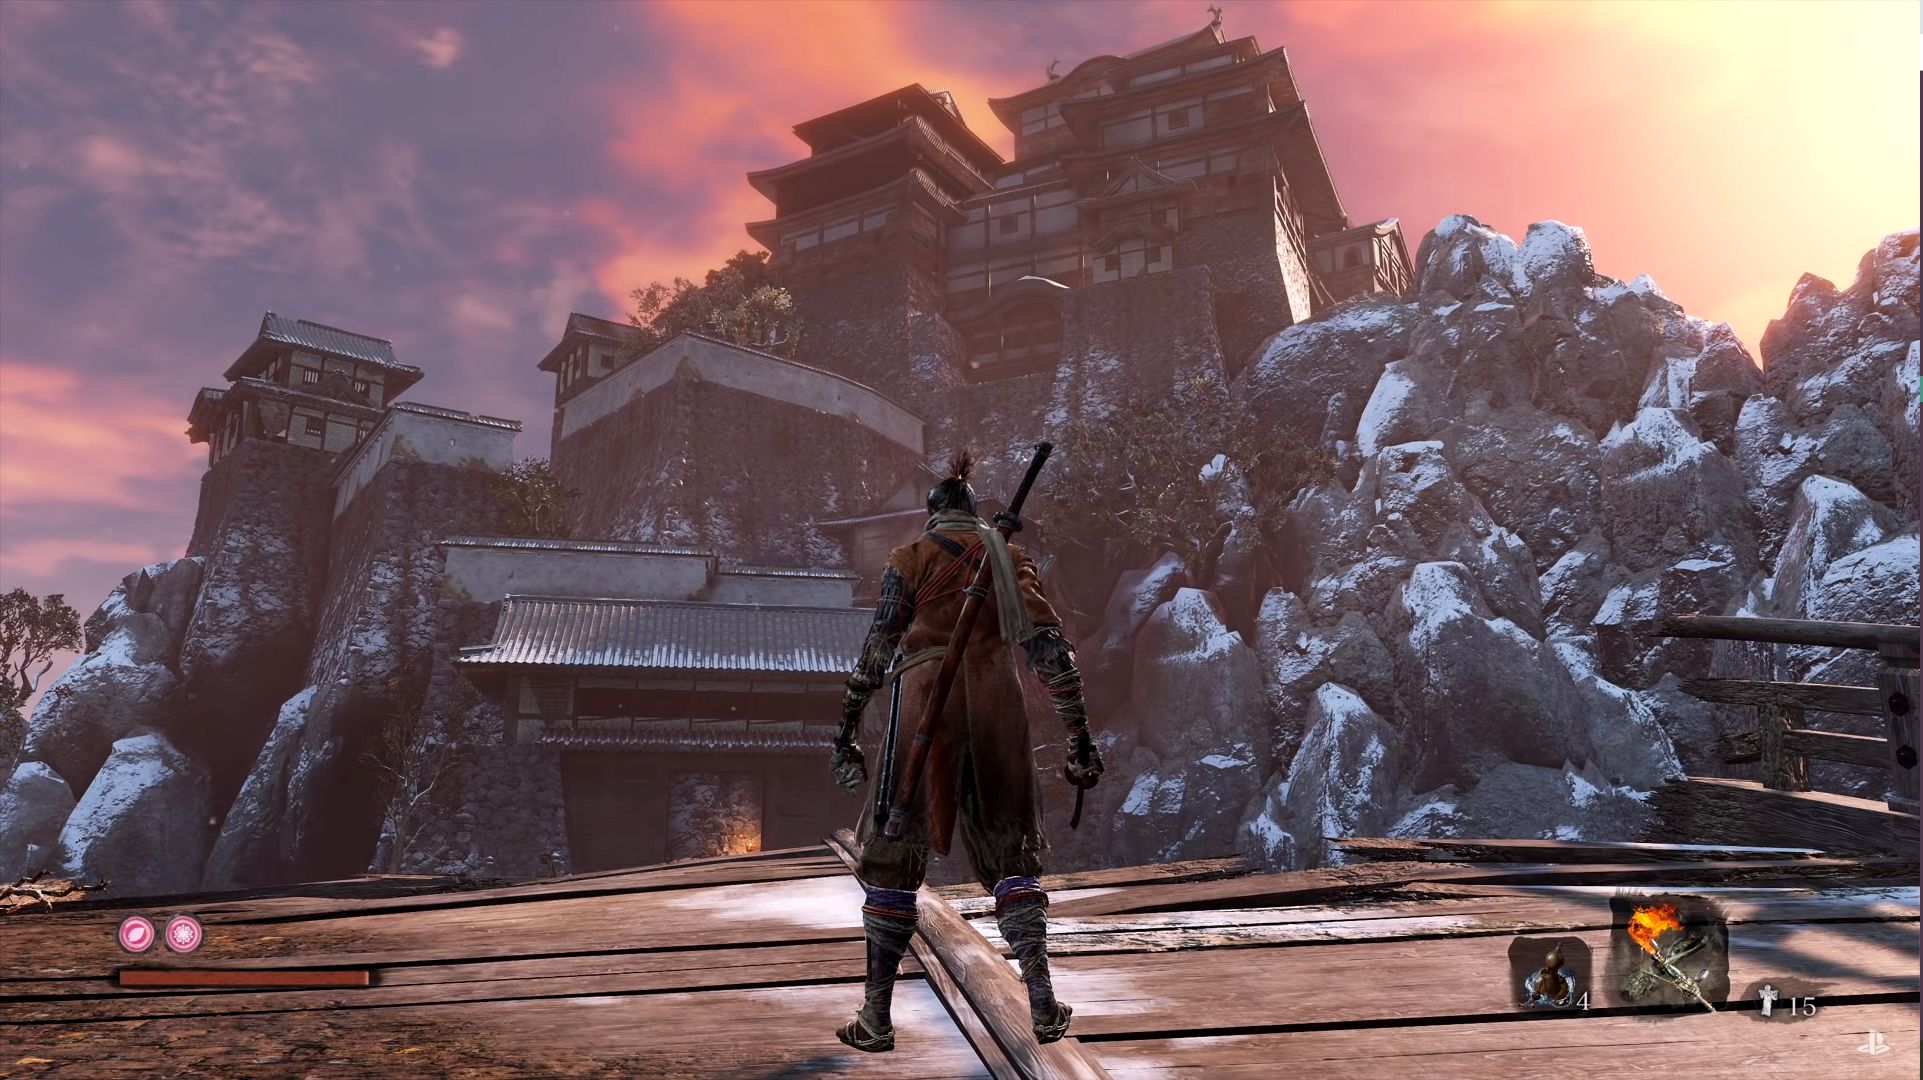 Sekiro: Shadows Die Twice sure is a FromSoftware game